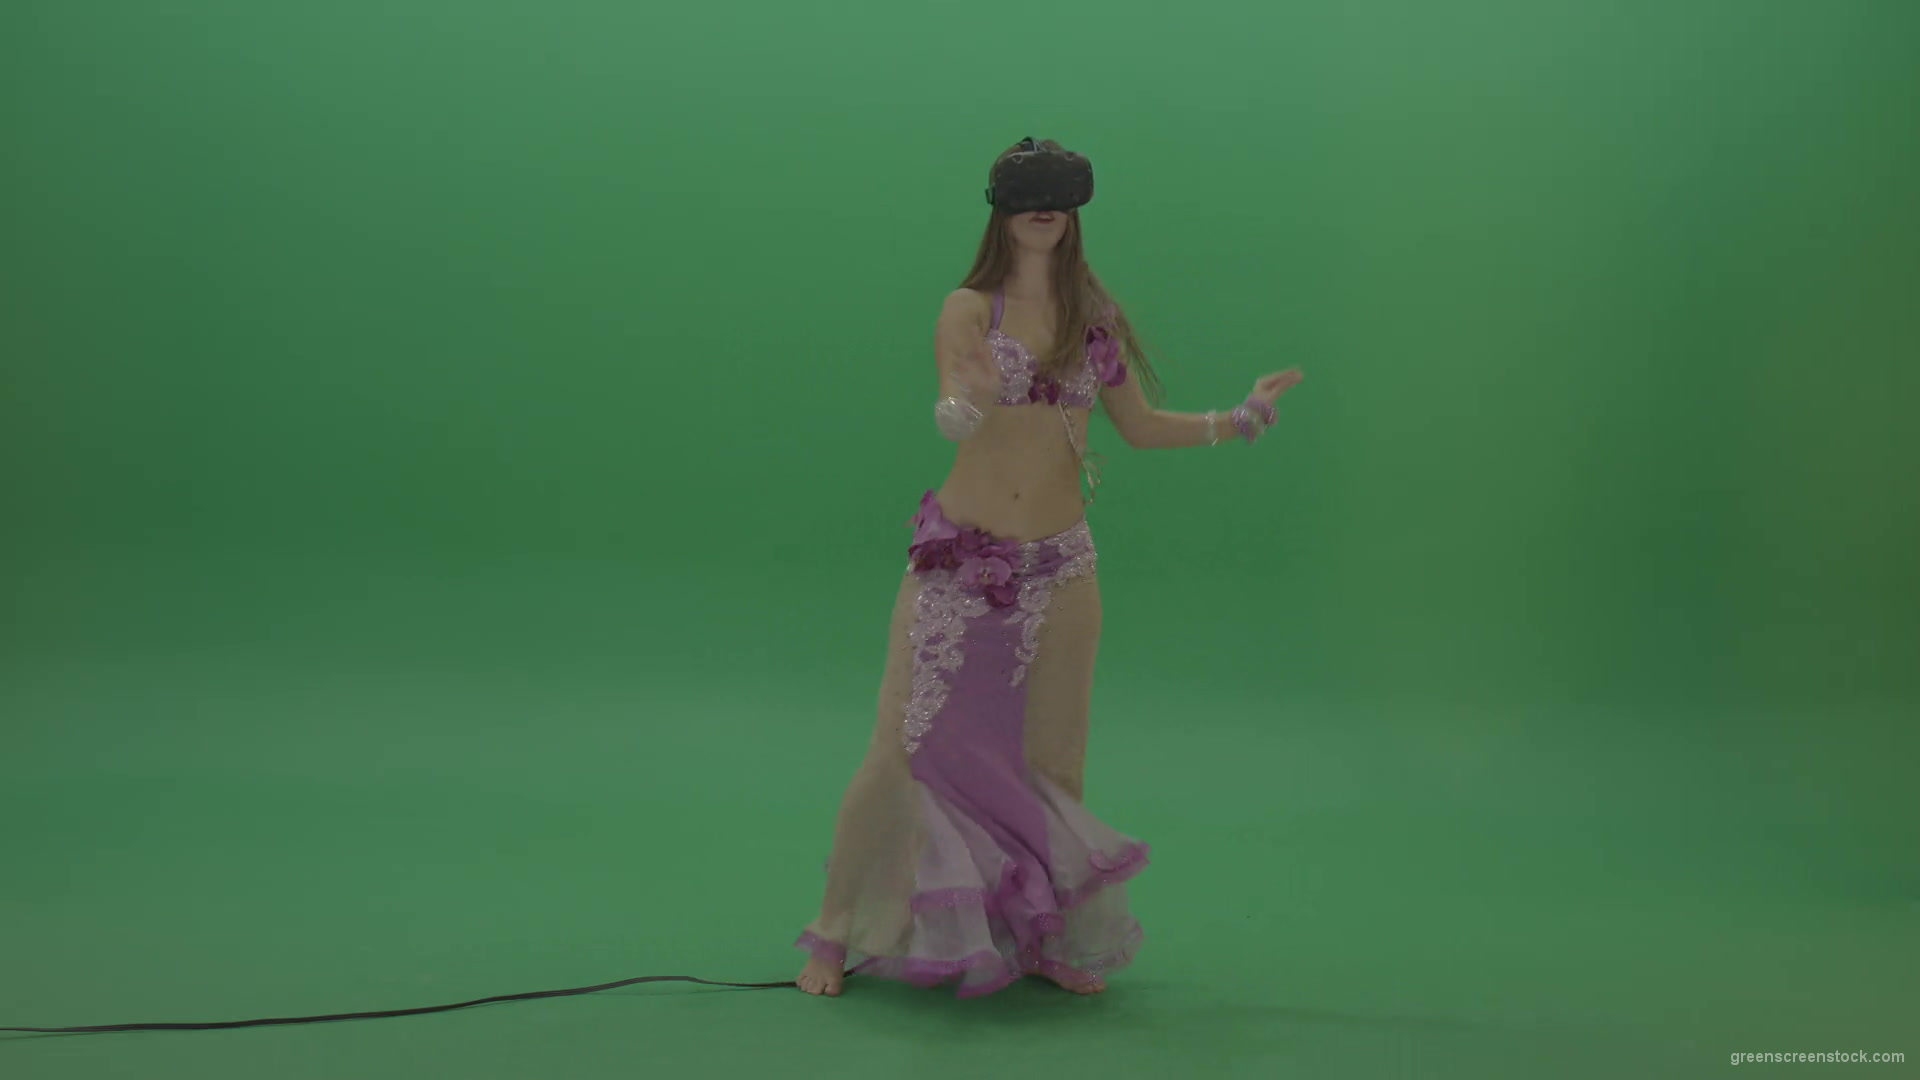 Beautiful-belly-dancer-in-purple-wear-and-VR-headset-dances-over-green-screen-background-1920_009 Green Screen Stock